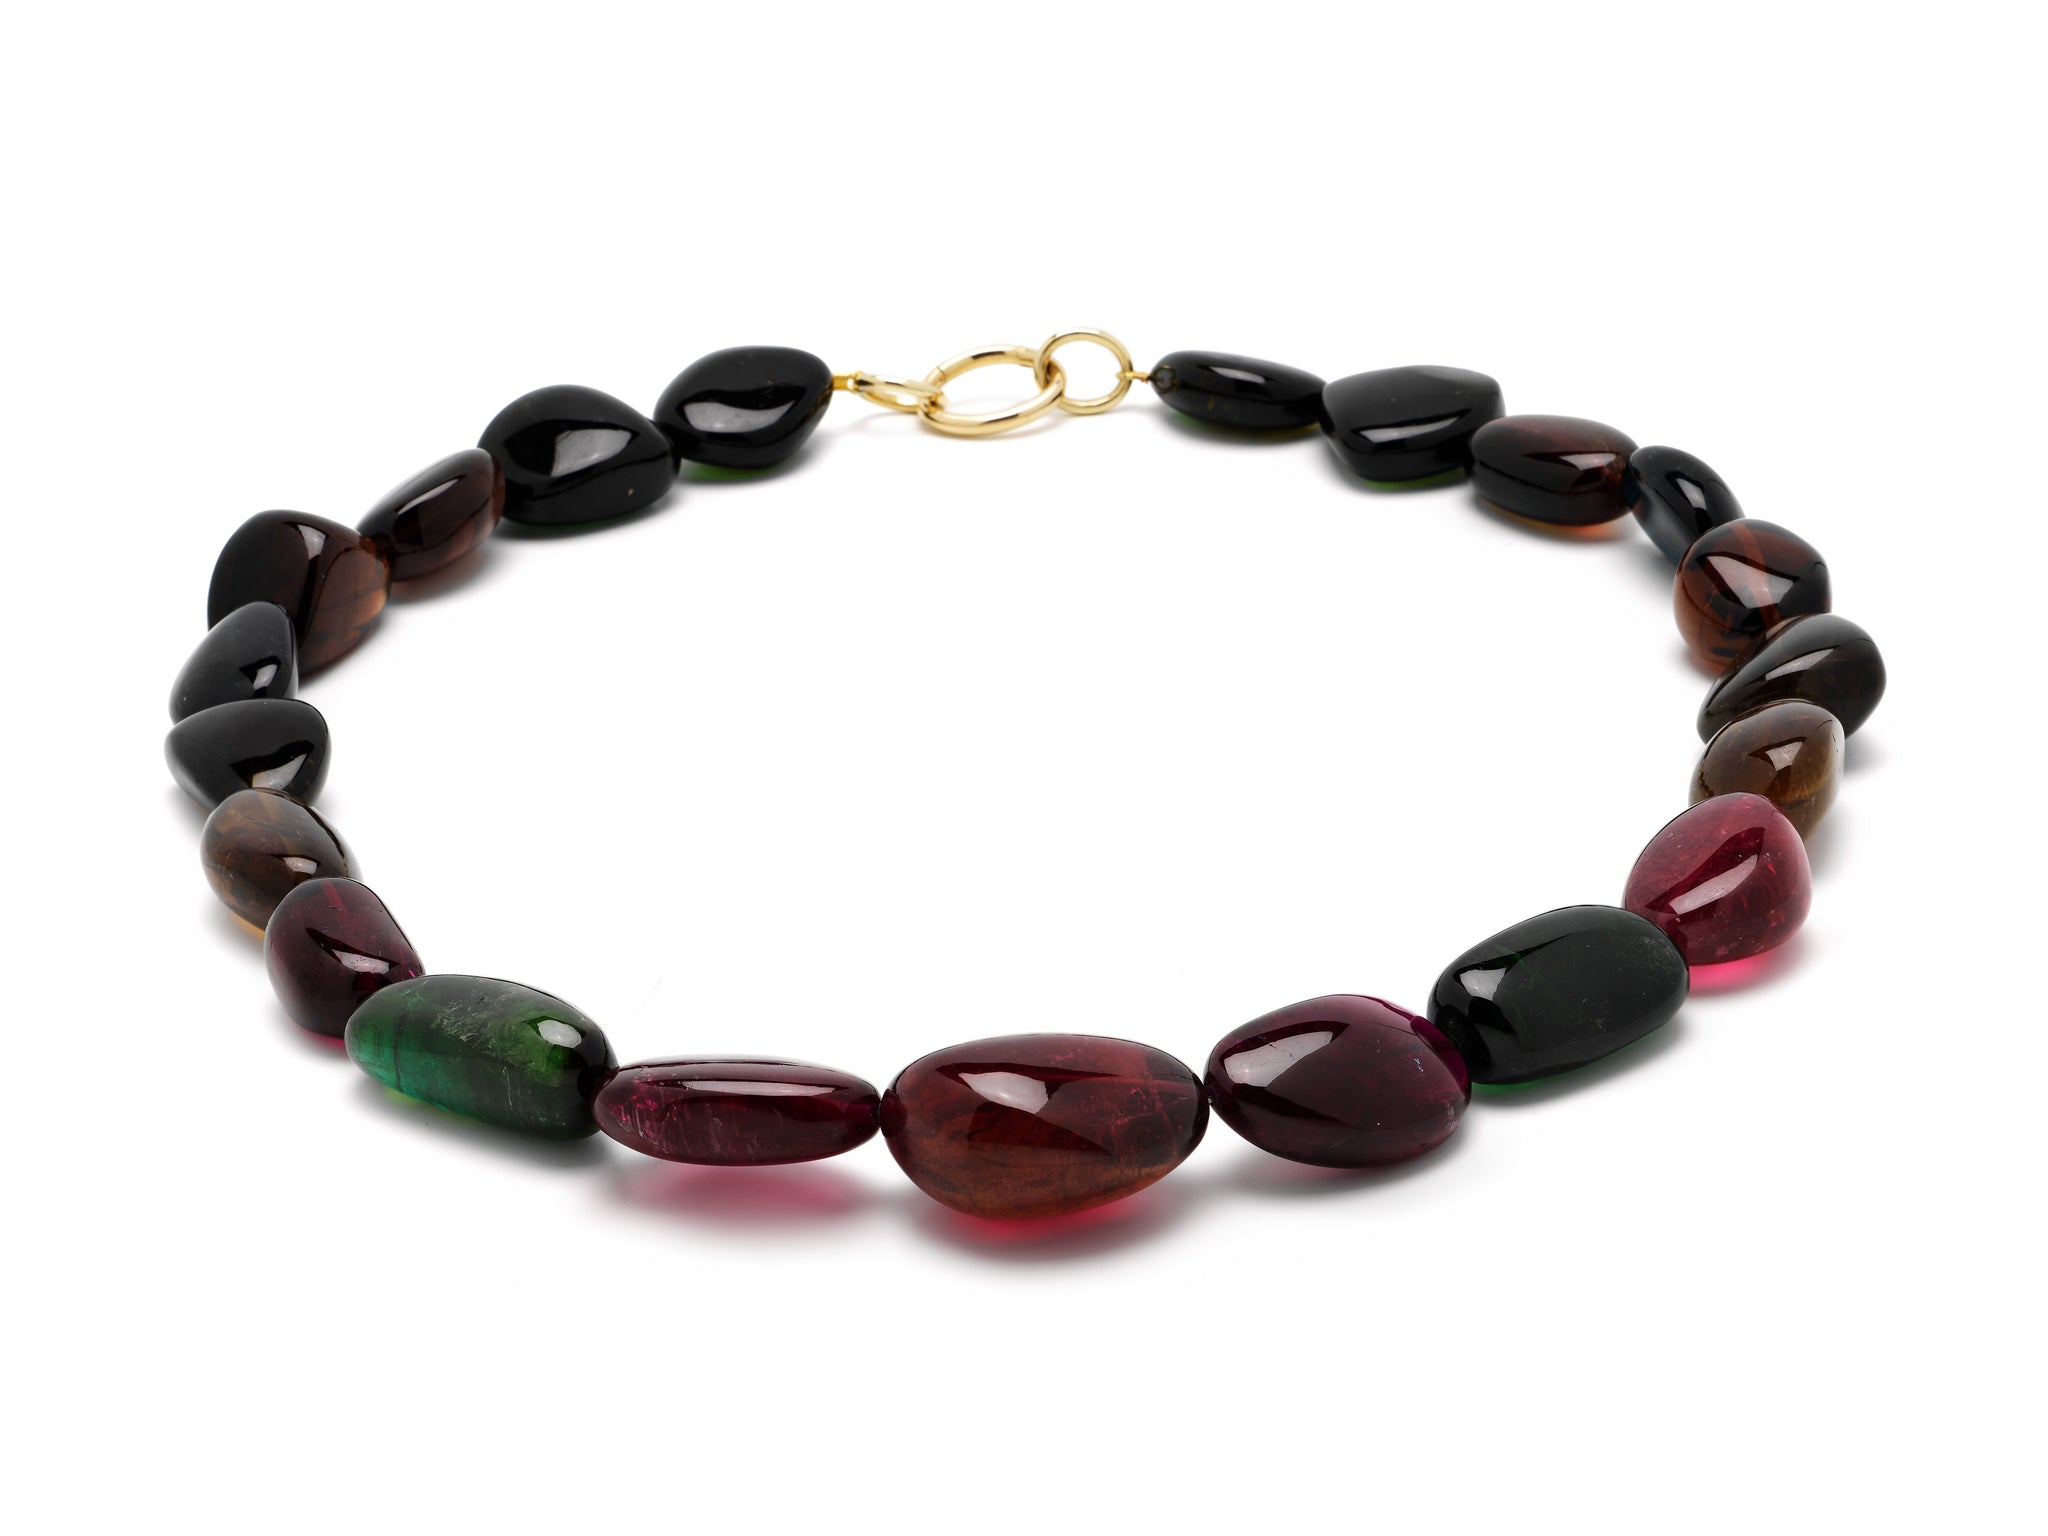 Necklace of 21 multi colour Tourmaline beads with a 14 krt yellow gold lock